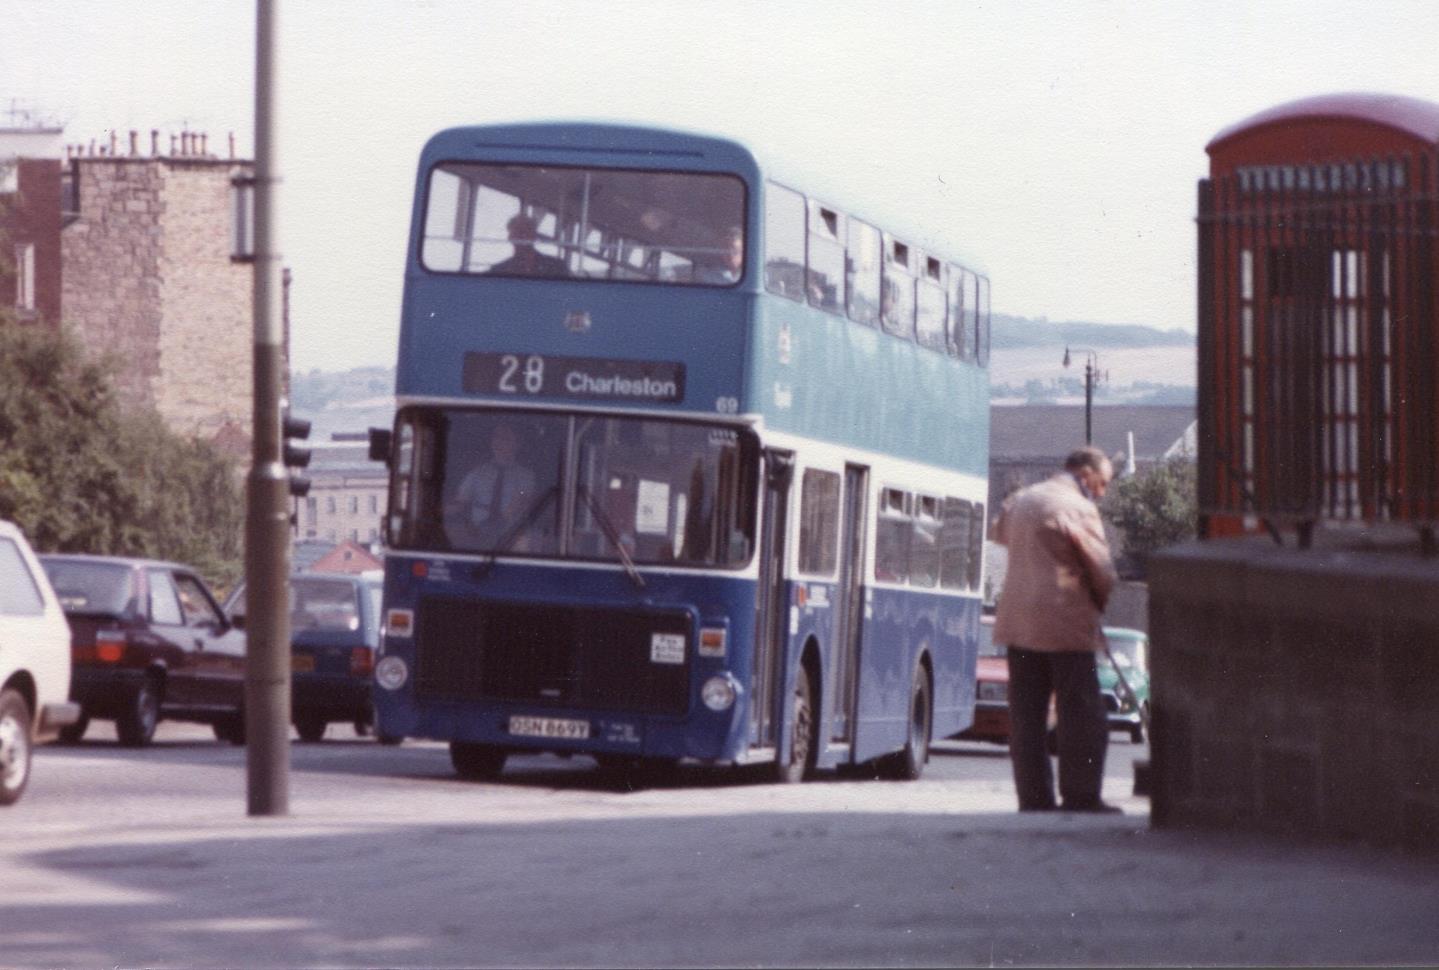 buses were blue before the Dundee electric buses were green!